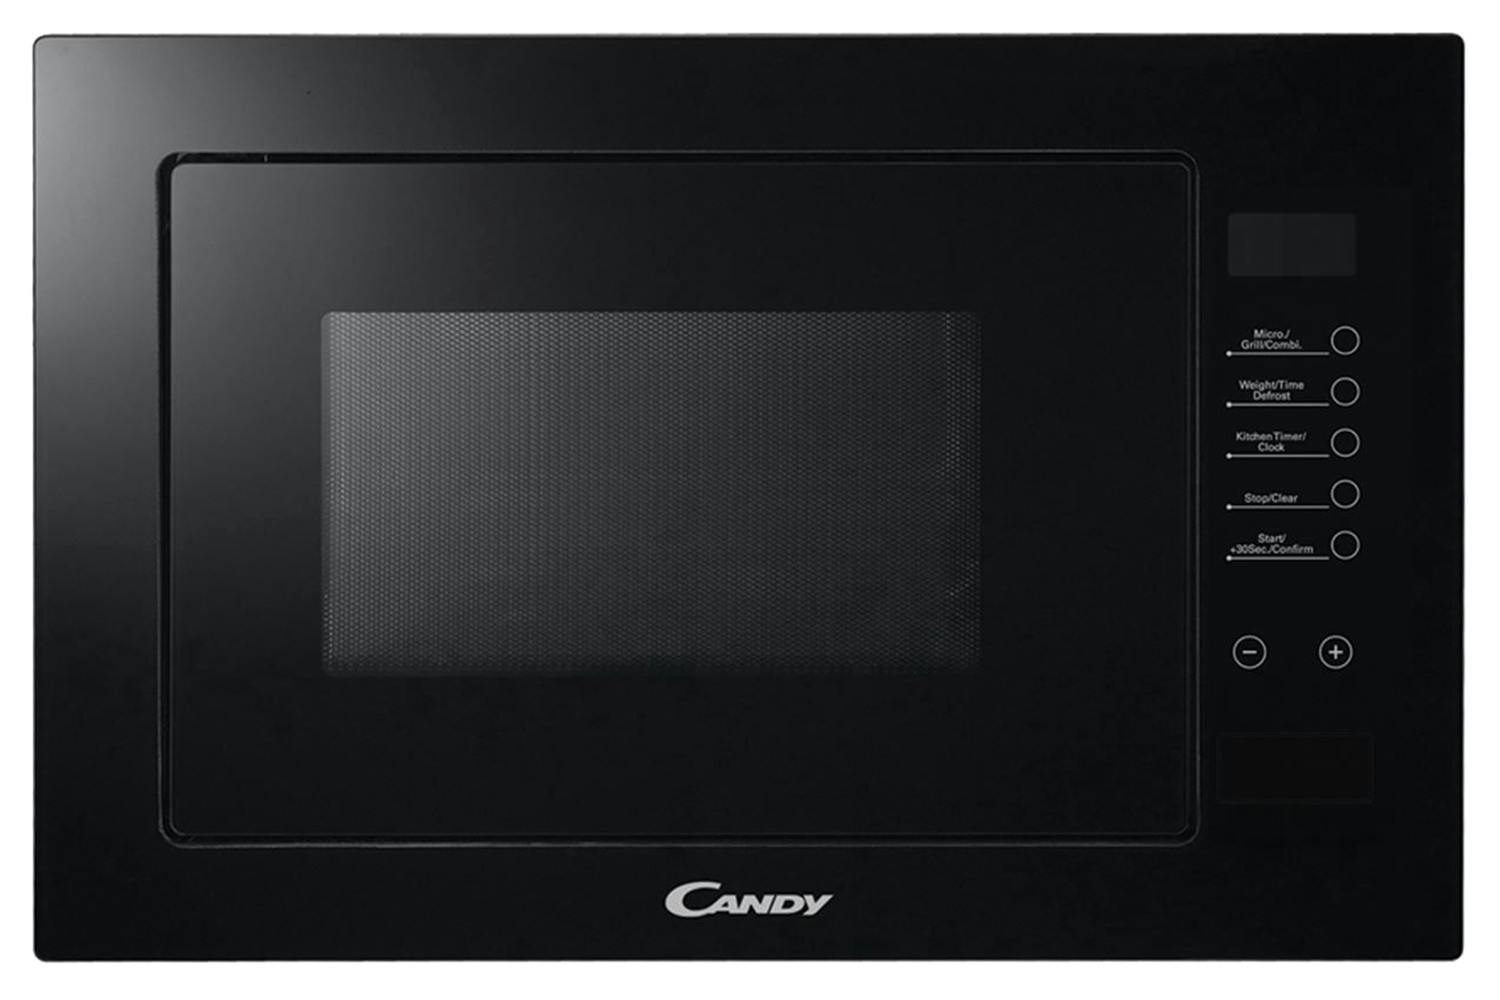 Candy 25L 900W Built-in Microwave | MICG25GDFN-80 | Black